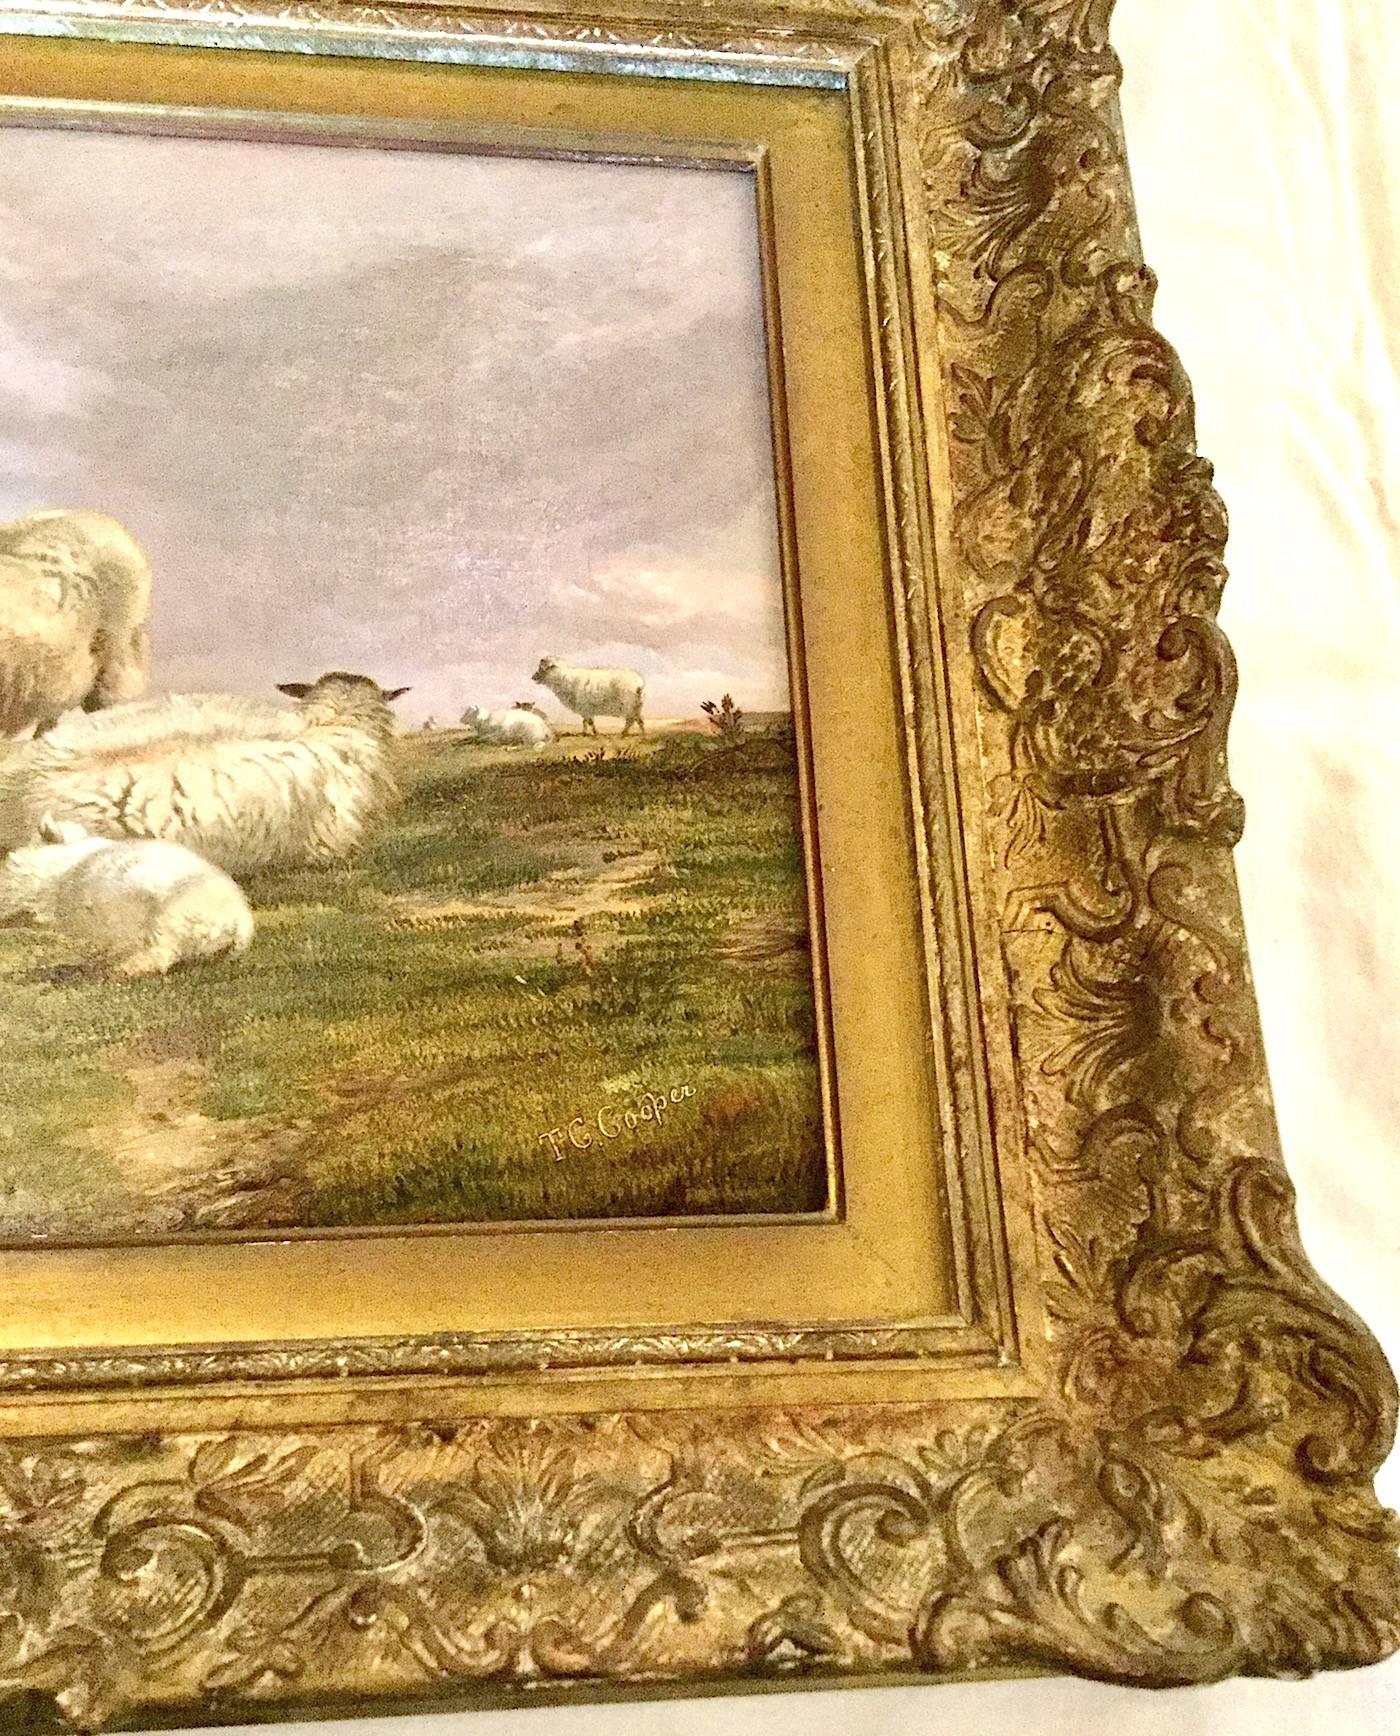 Sheep in a Landscape An English Scene Victorian 19th Century by T G Cooper  - Brown Animal Painting by Thomas George Cooper